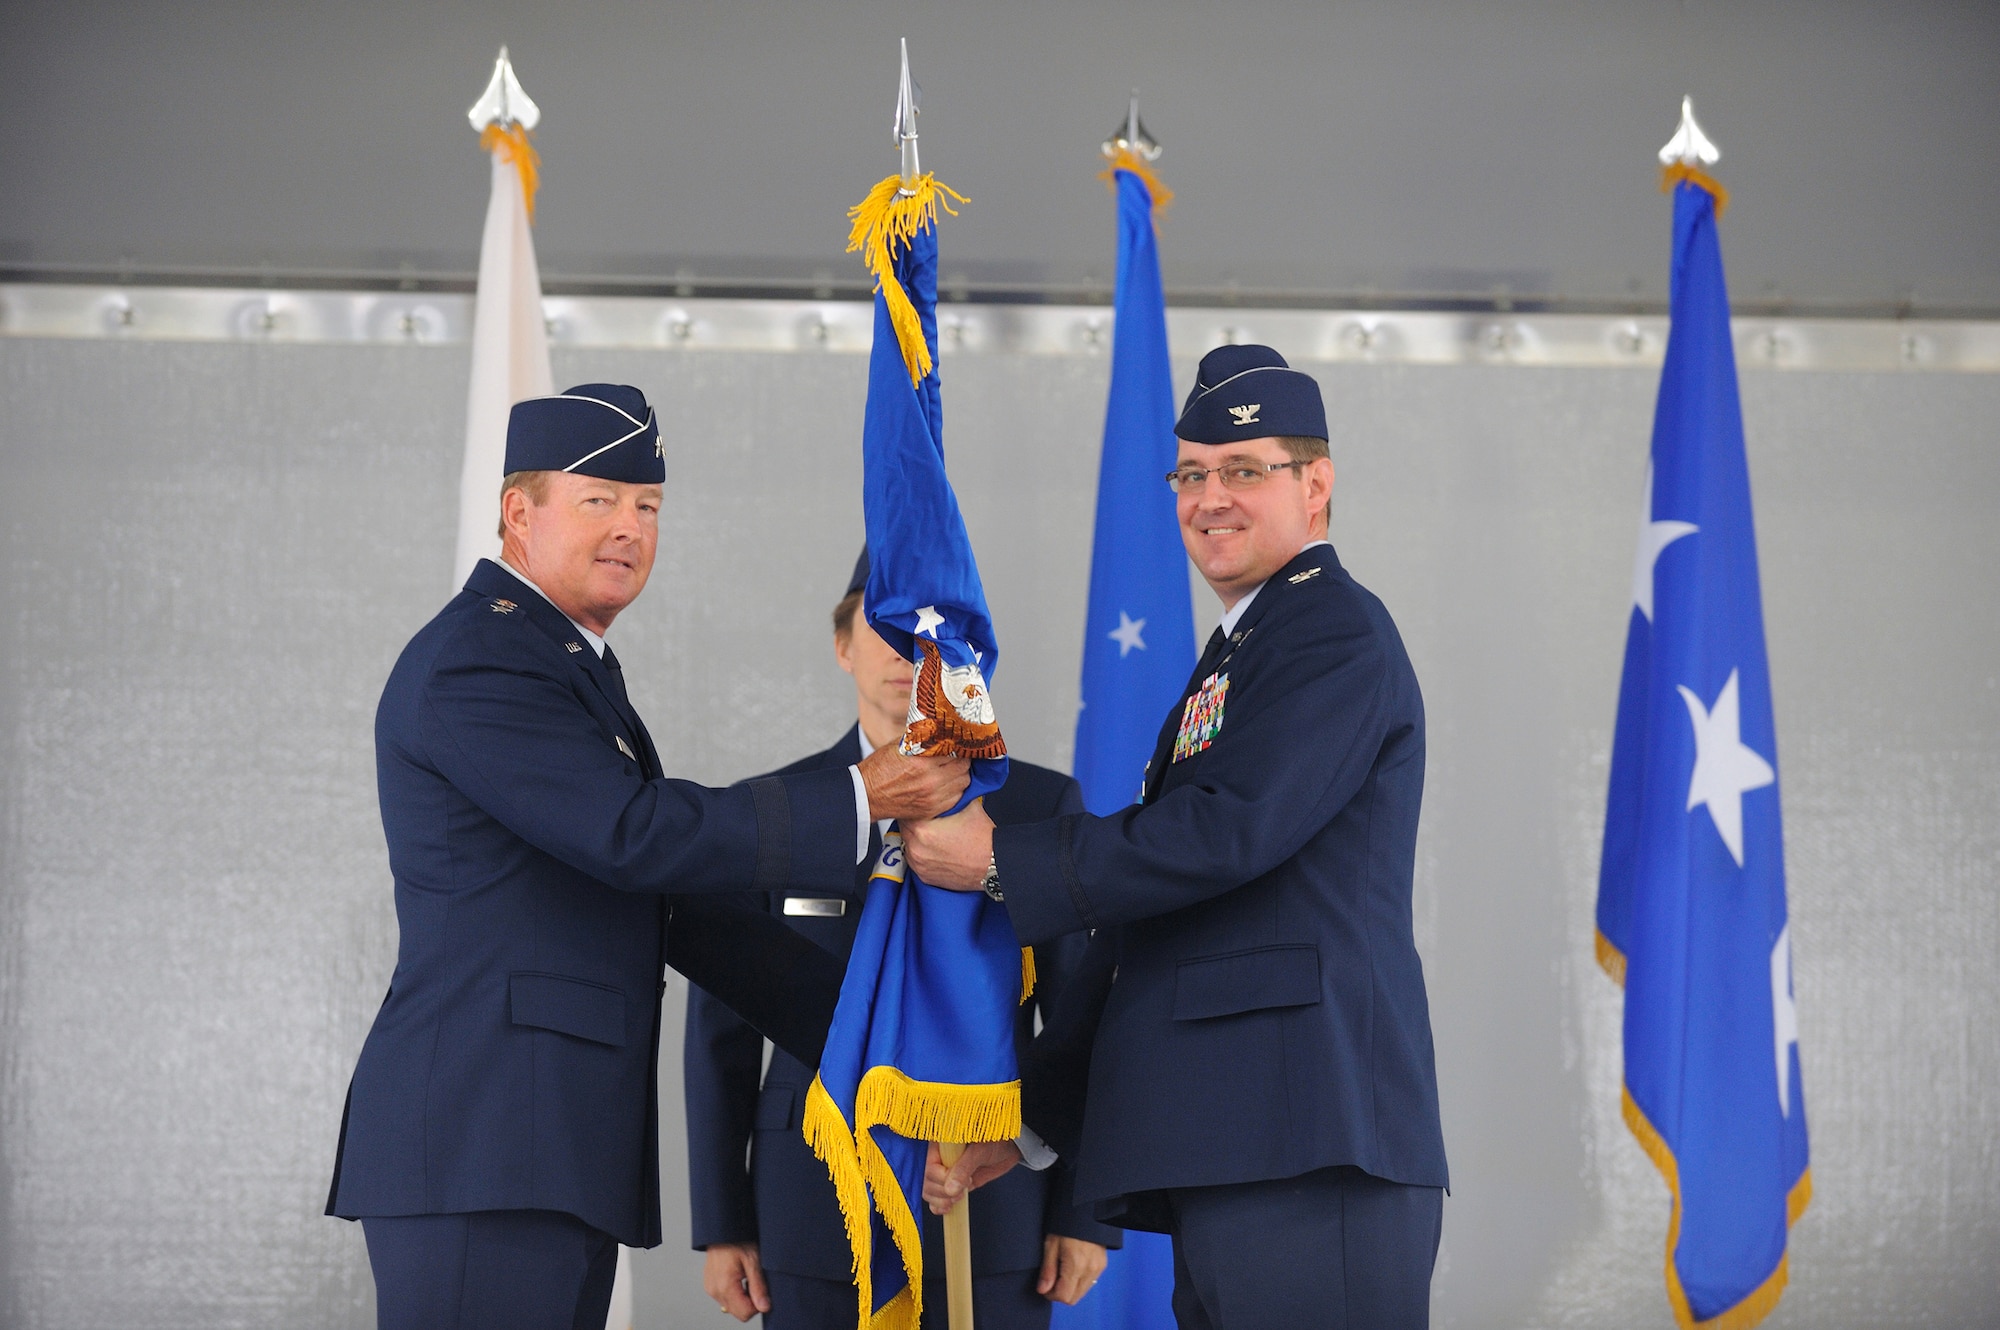 JOINT BASE ELMENDORF-RICHARDSON, Alaska -- Lt. Gen. Dana T. Atkins, commander Alaska Command, passes the 673d Air Base Wing (673d ABW) guidon to Col. Robert D. Evans, commander 673d Air Base Wing, during the unit's activation ceremony July 30. The 673d ABW is the supporting unit for Joint Base Elmendorf-Richardson which is comprised of over 6,000 military, civilian and contractors from both Elmendorf Air Force Base and Fort Richardson Army Garrison near Anchorage, Alaska. (Air Force photo by Master Sgt. Jeremiah Erickson)